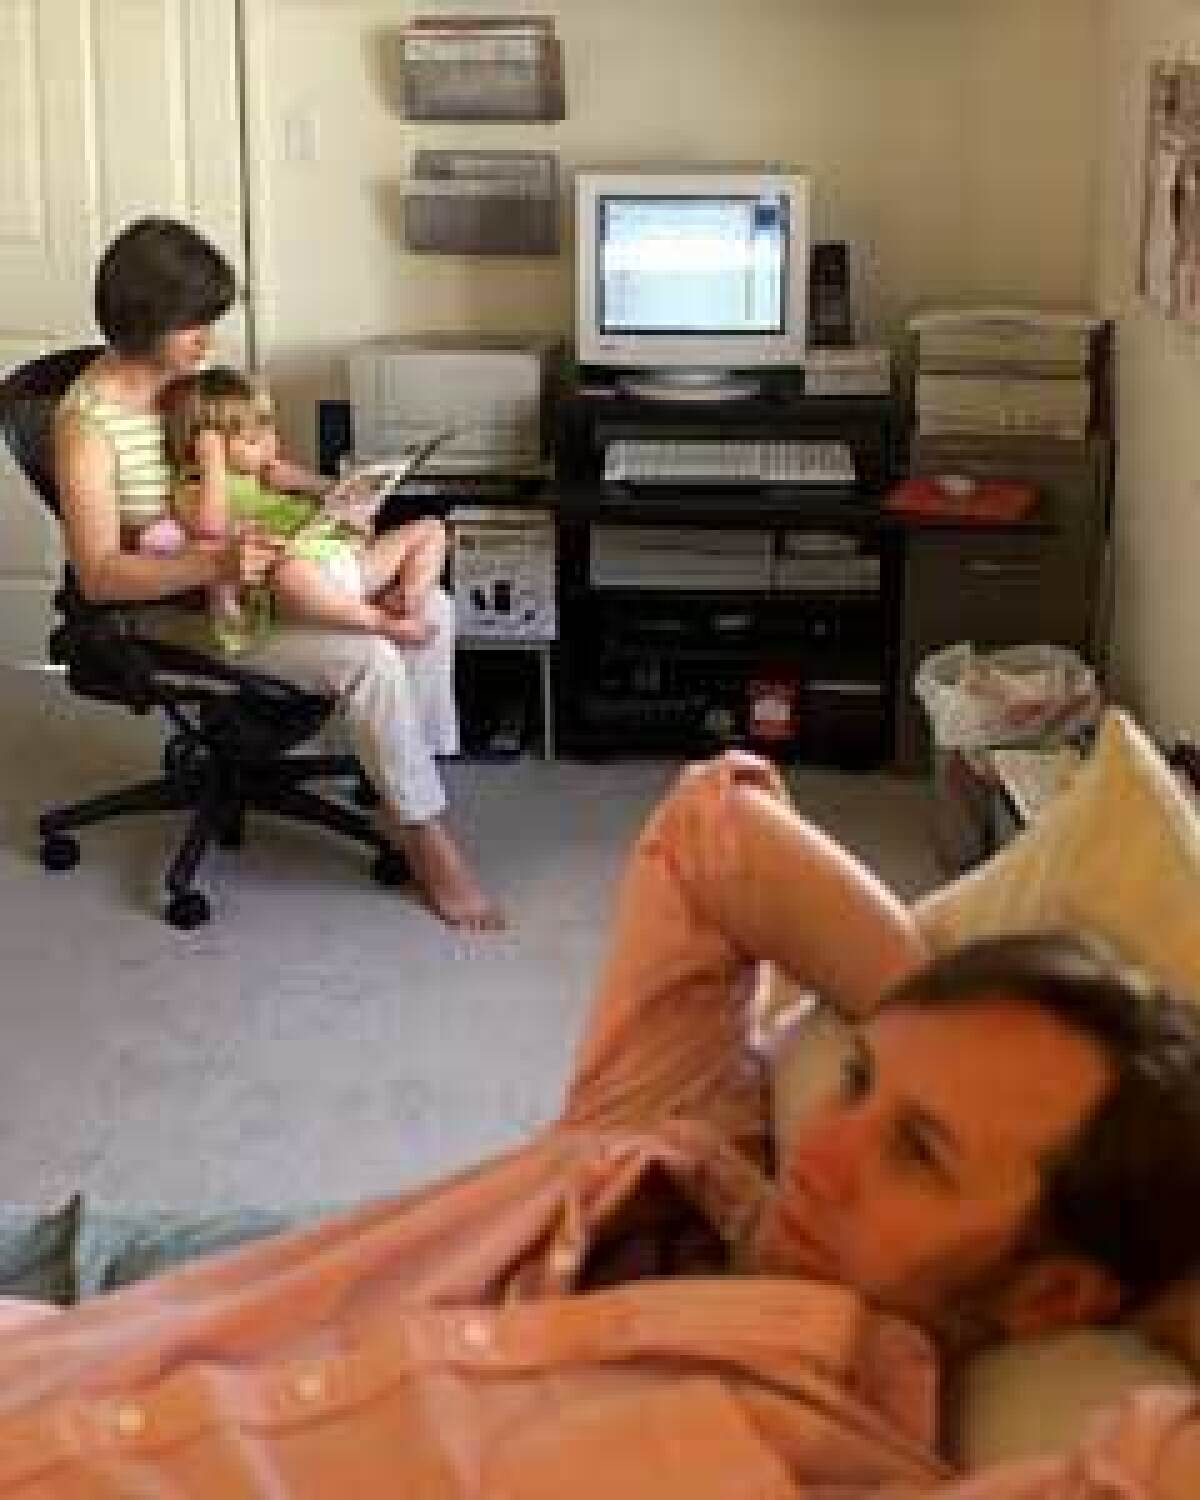 Paul Trautwein relaxes with wife Mary Beth and daughter Edith in the bedroom, which doubles as Paul's office.